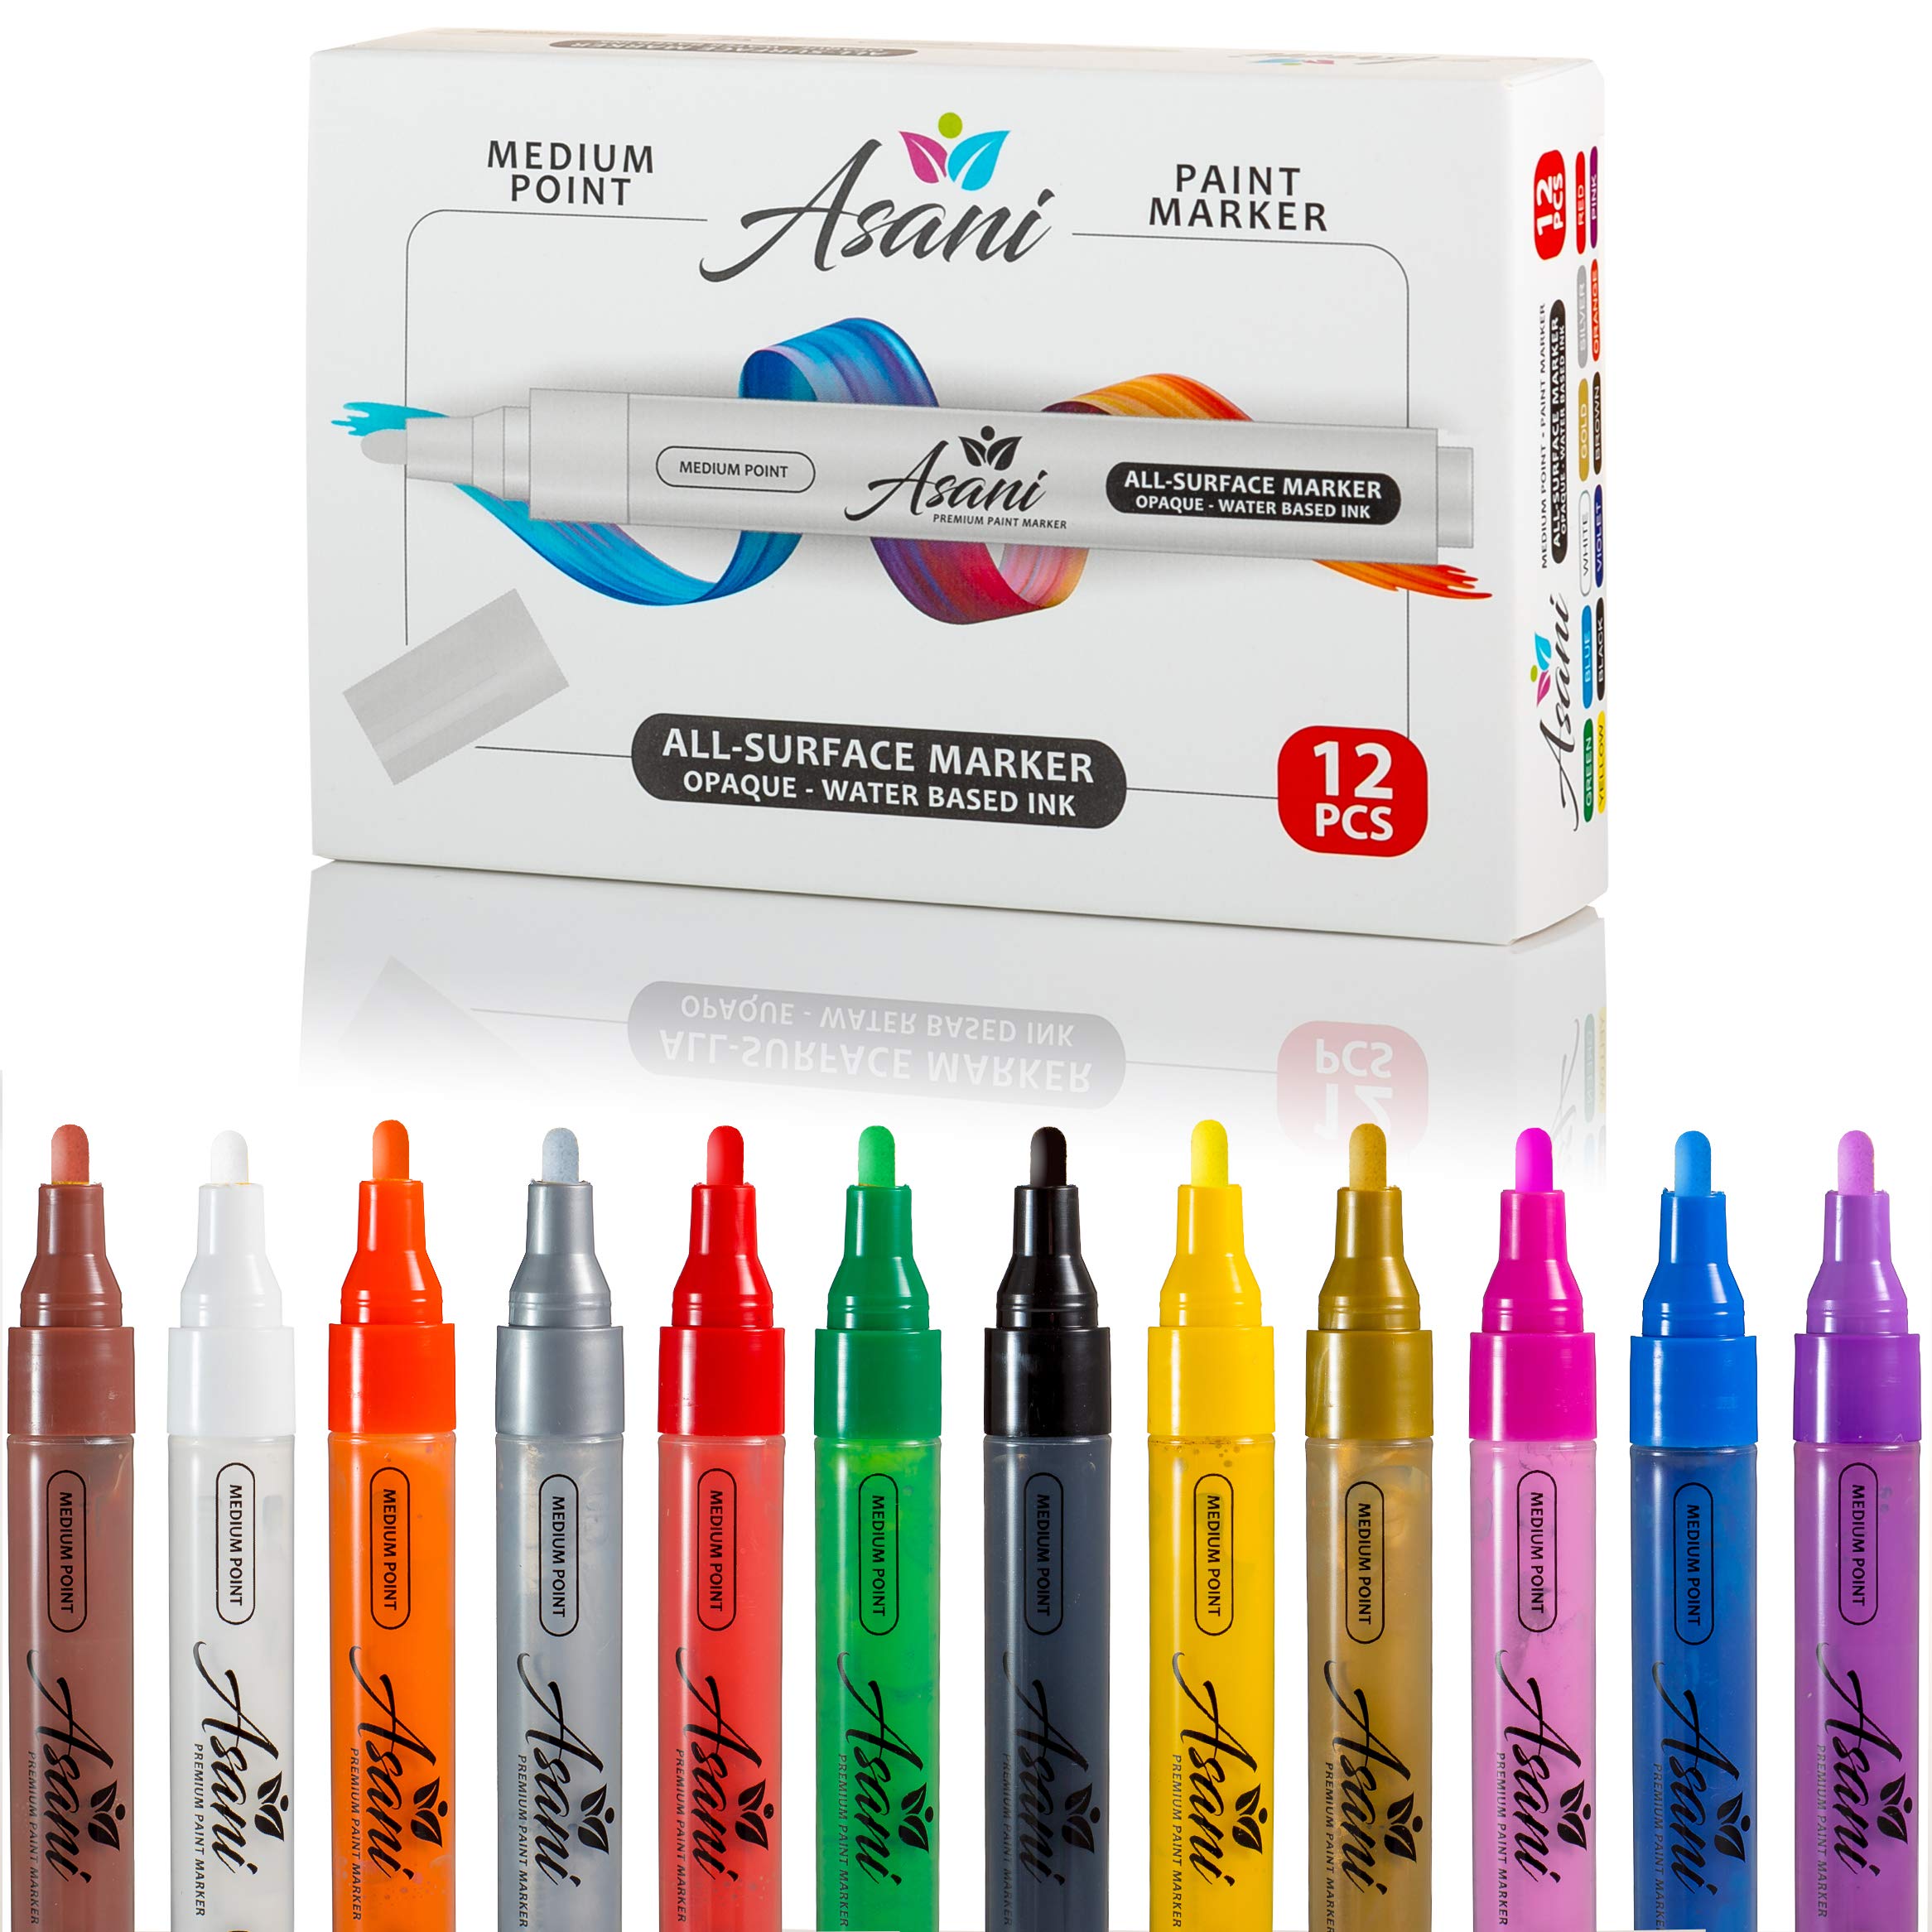 Crafts 4 All crafts 4 all acrylic paint markers set - 12, broad tip-tip  acrylic paint pens for rock painting, glass, wood, canvas and fabr